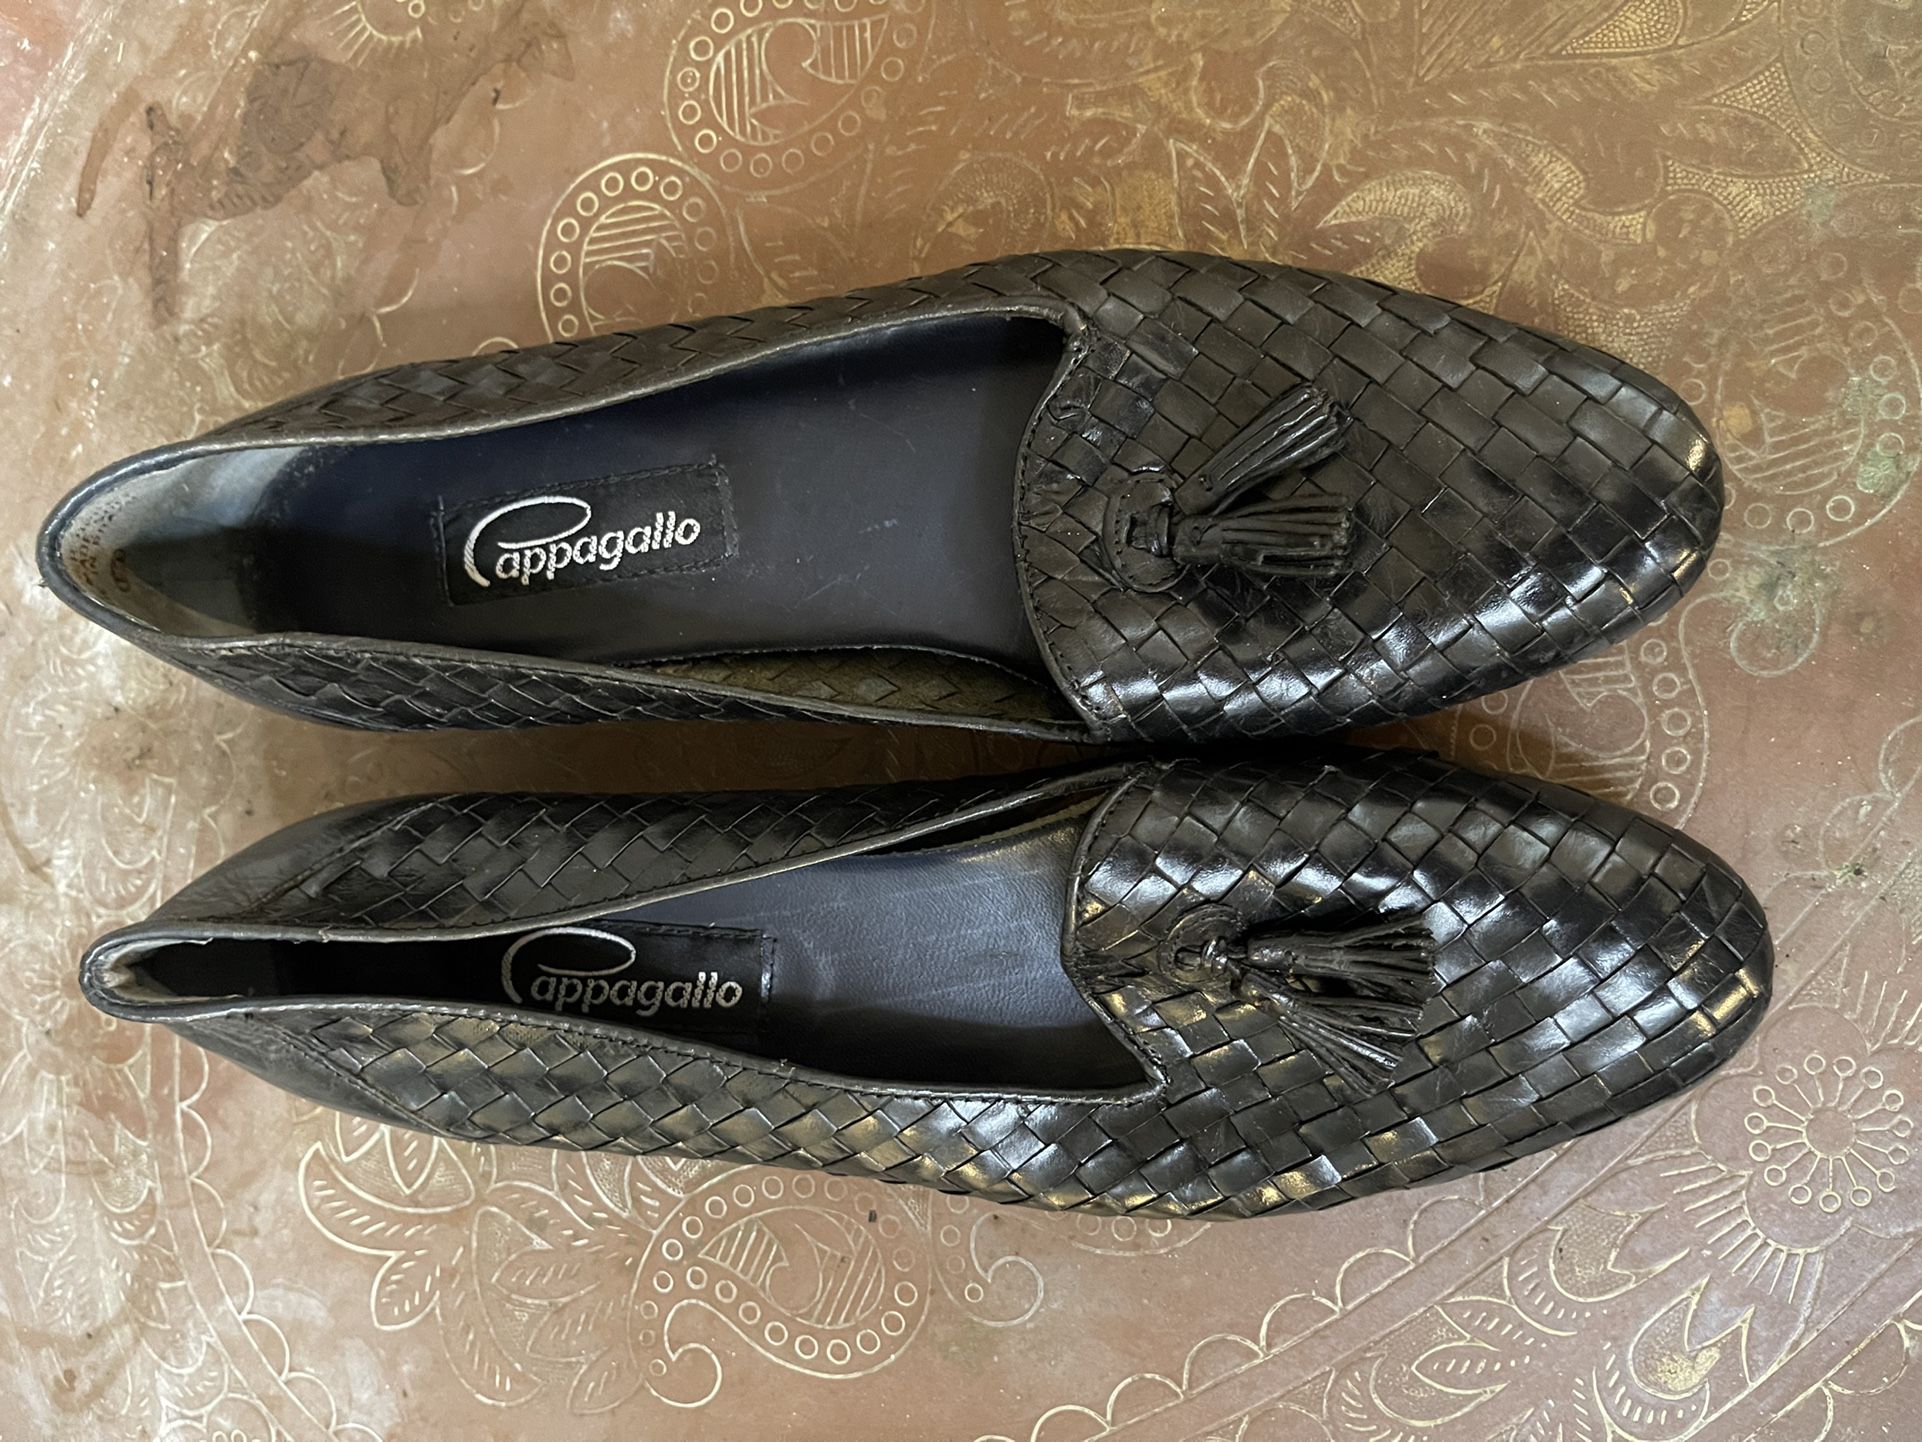 Vintage 1970’s Never Worn Braided Leather Pappagallo Slipper Shoes Size 9.5N